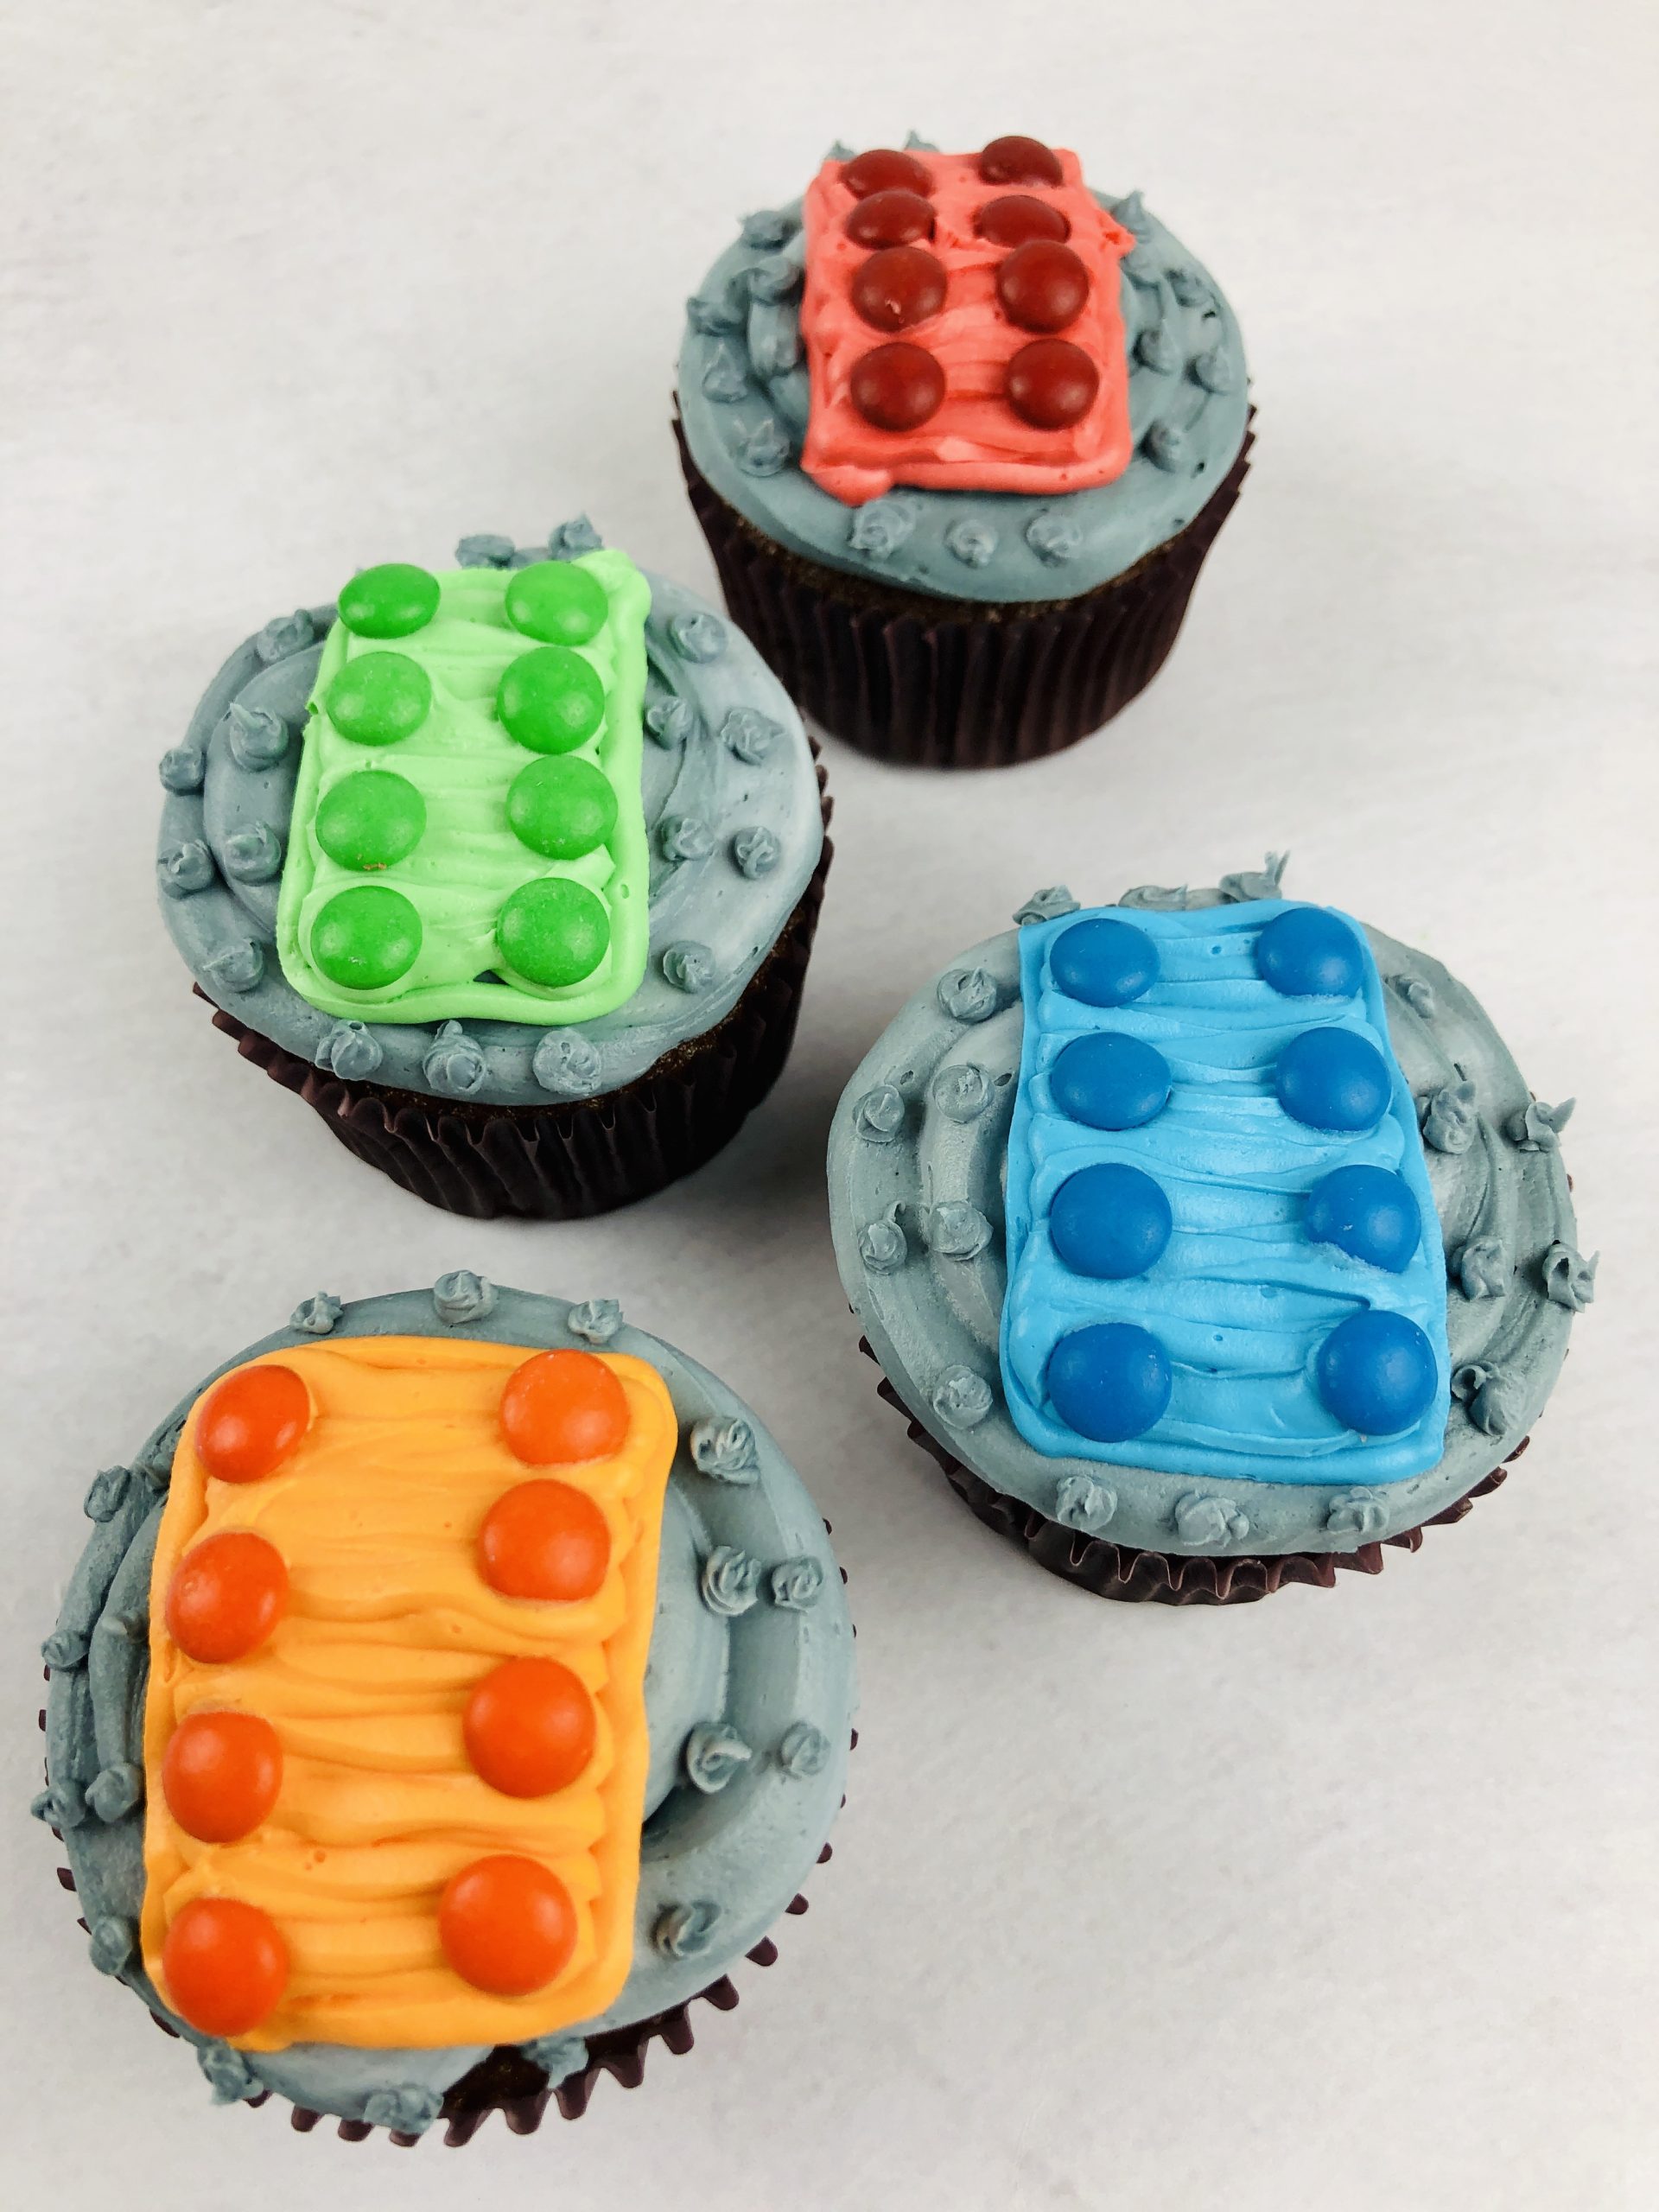 How to Make Lego Cupcakes: A Step by Step Guide